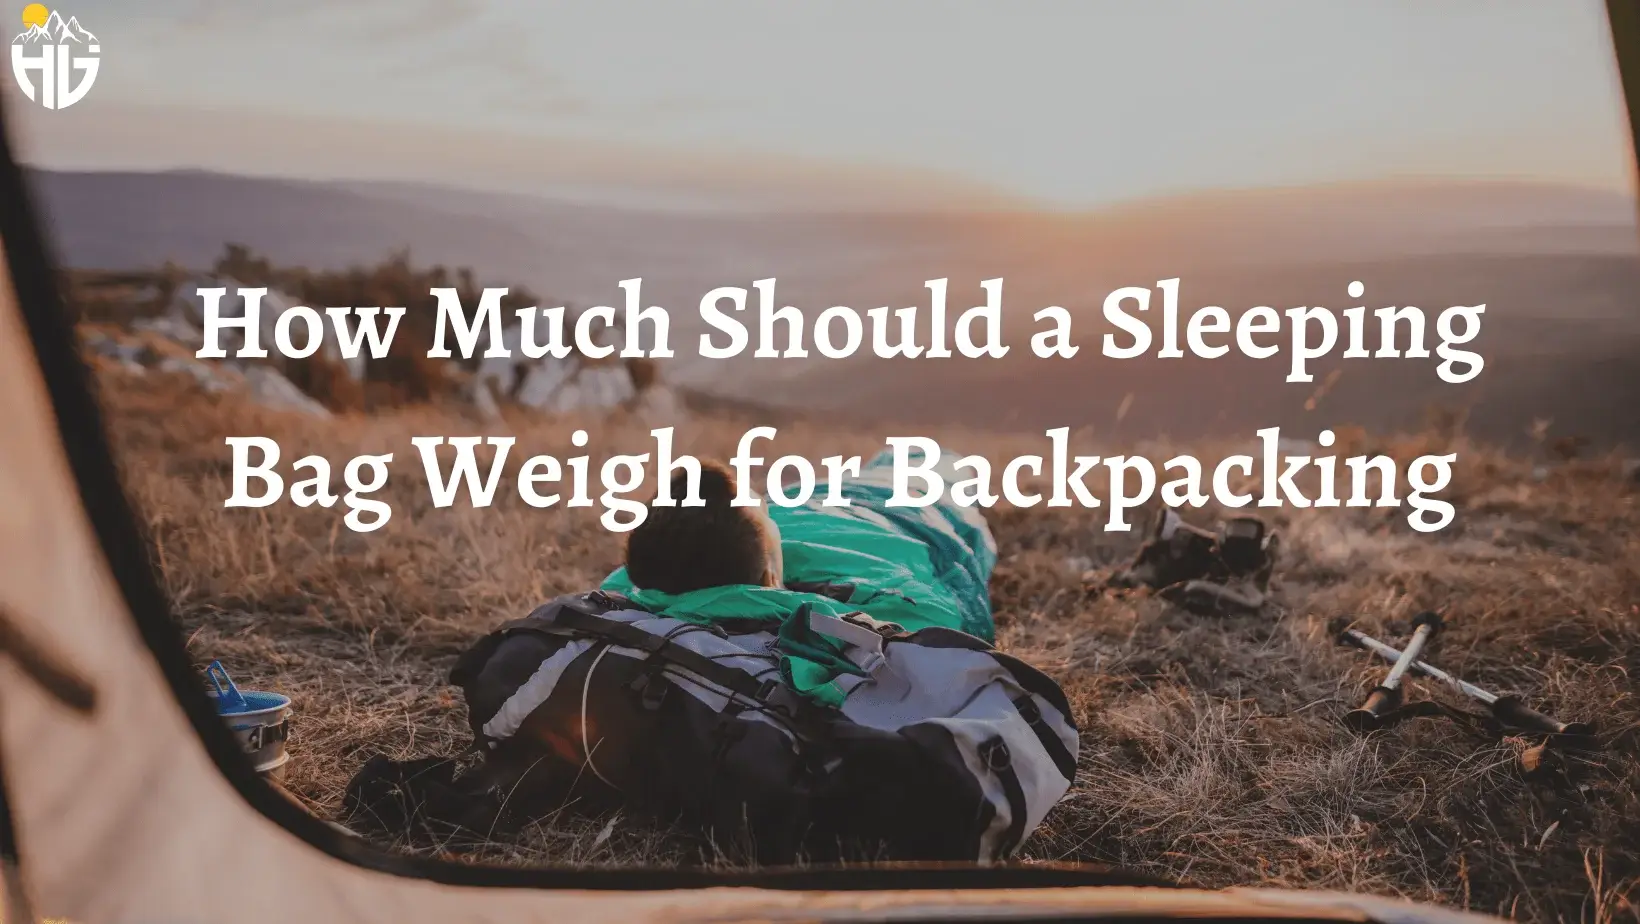 How Much Should a Sleeping Bag Weigh for Backpacking